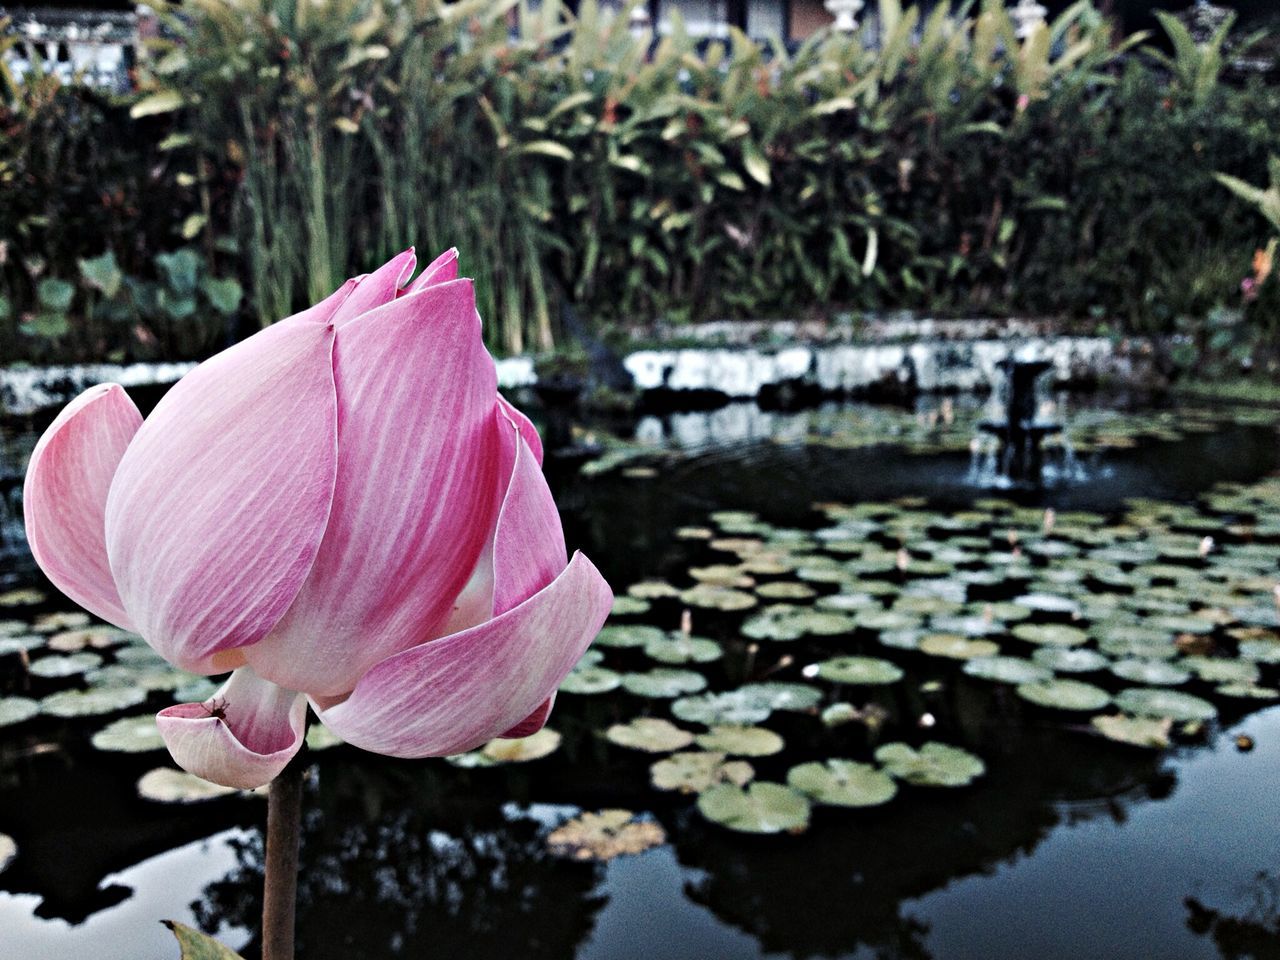 flower, petal, fragility, pink color, freshness, flower head, water, beauty in nature, nature, focus on foreground, single flower, close-up, growth, blooming, leaf, water lily, stem, plant, pond, blossom